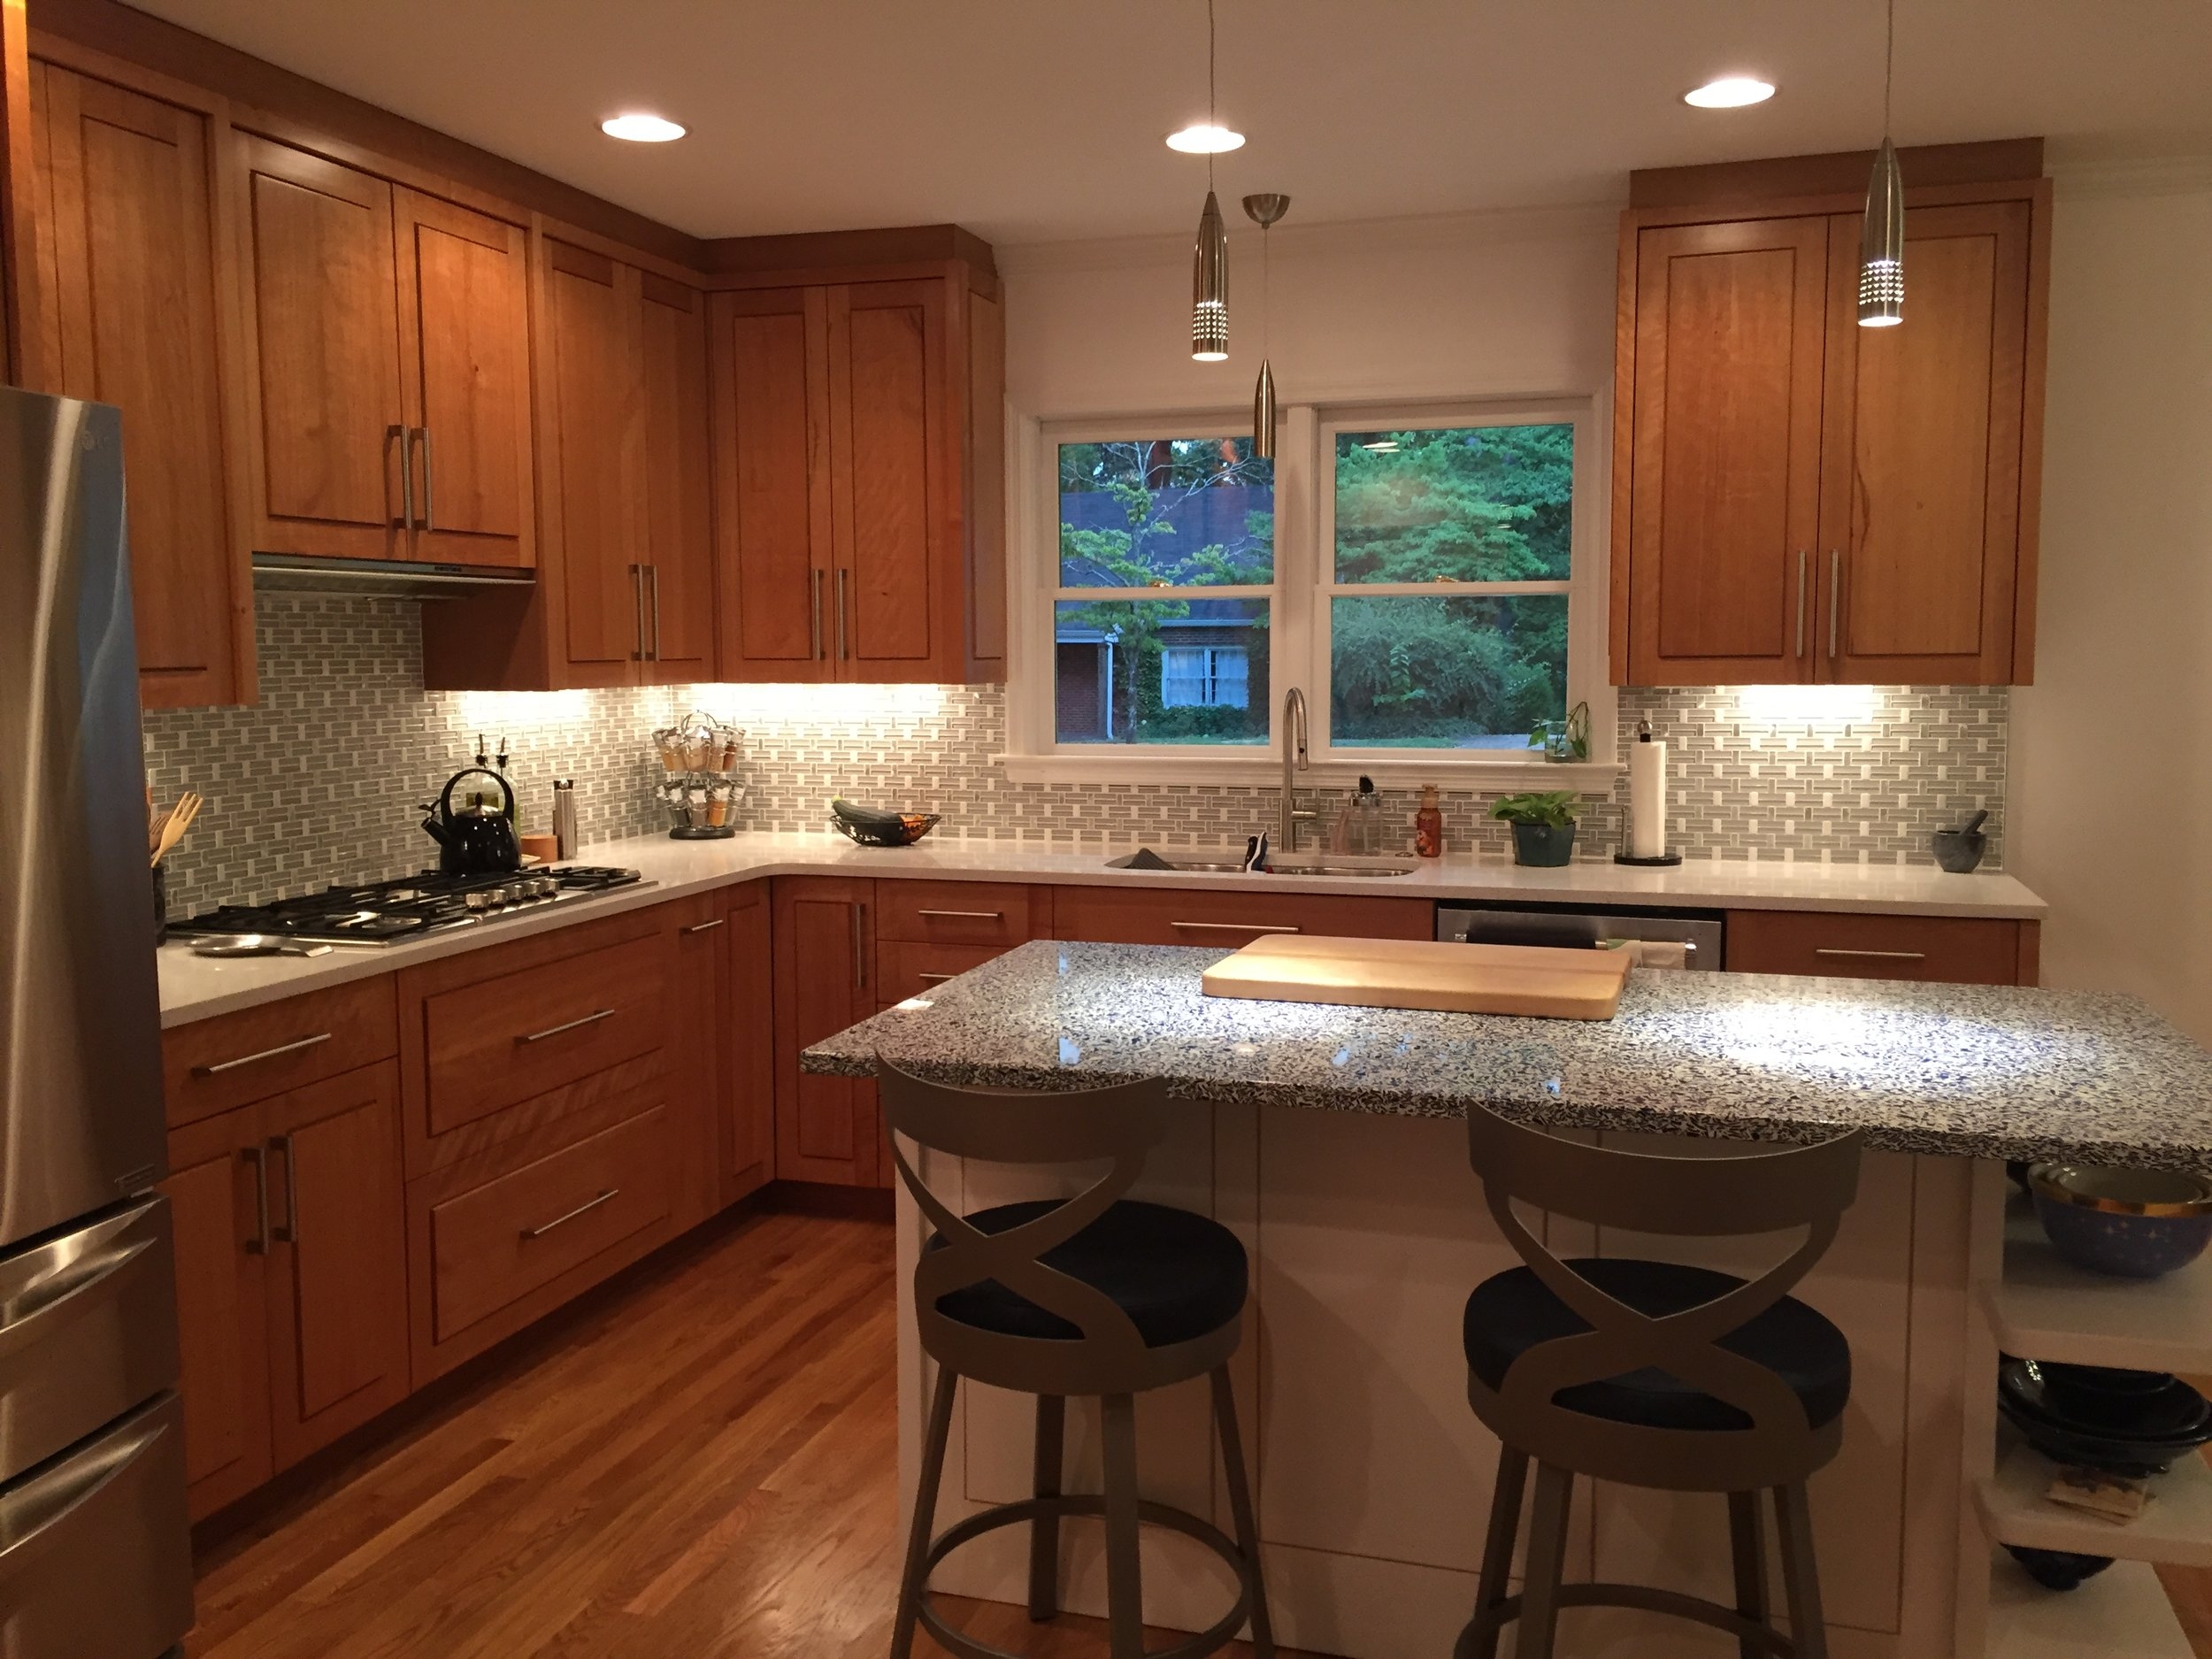 Custom Full-Height Kitchen Cabinets in Quartersawn Cherry, with Modern White Island